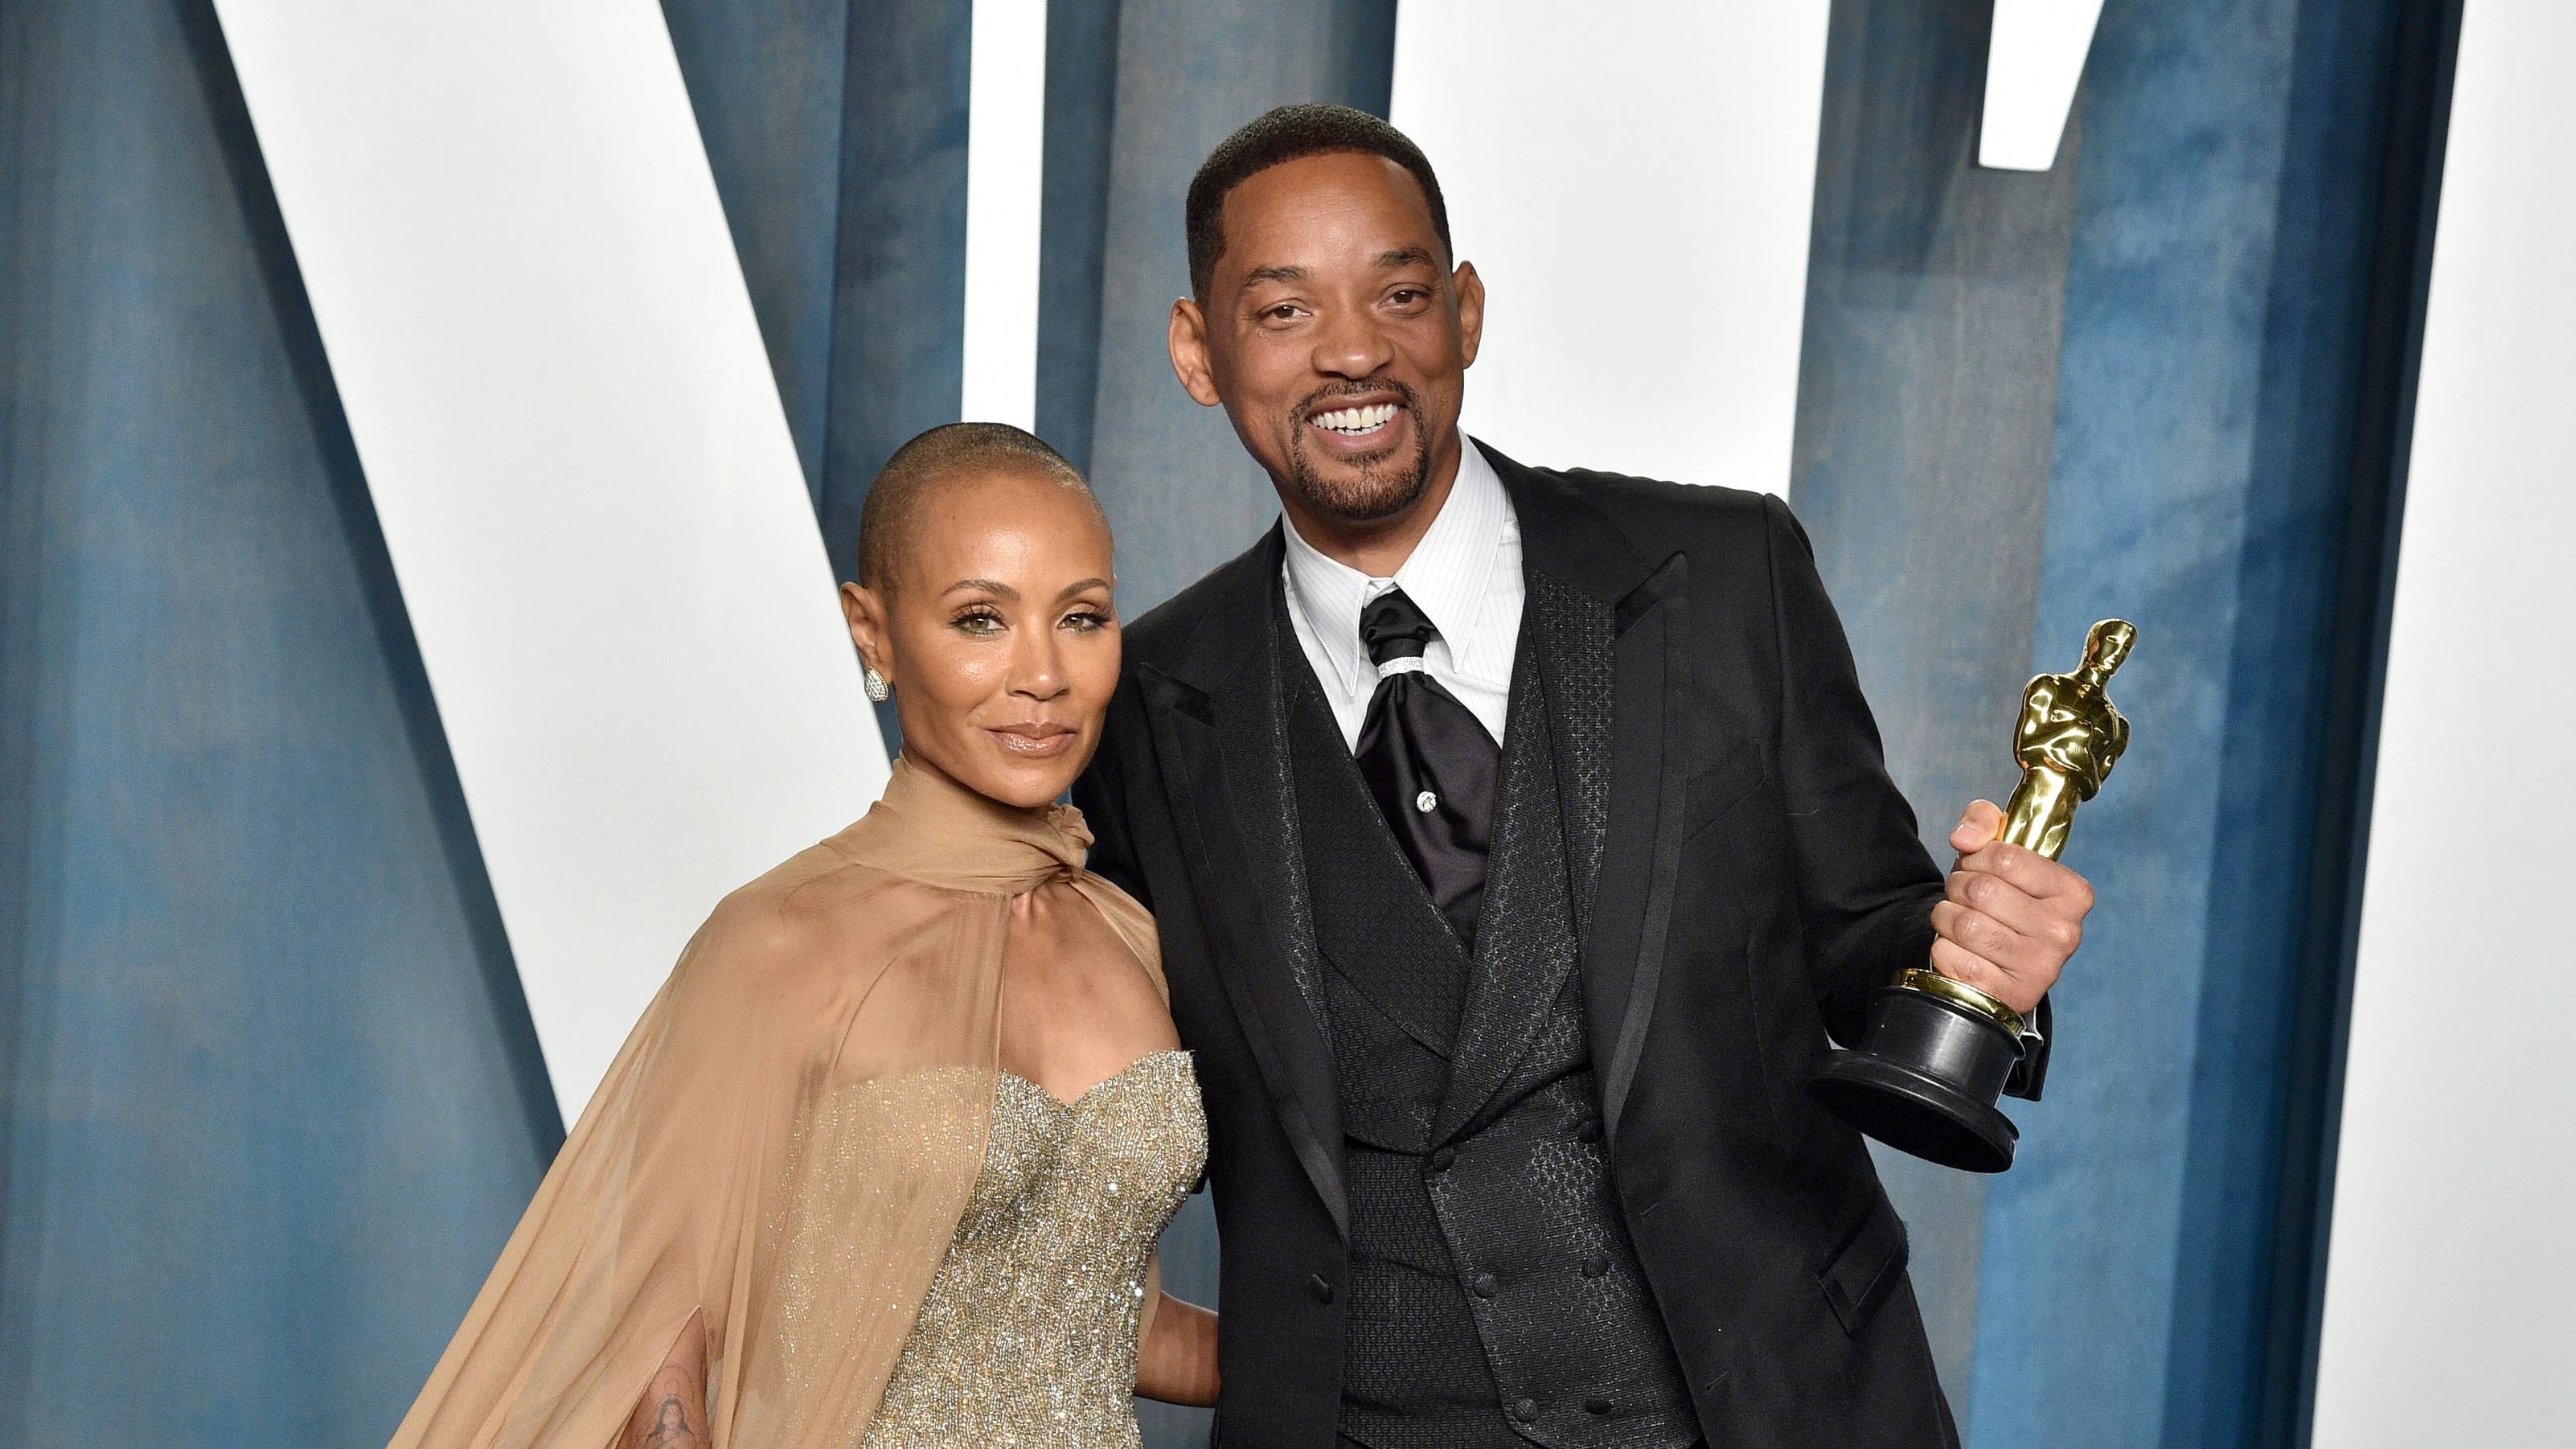 Jada Pinkett Smith says revealing separation from Will Smith is a